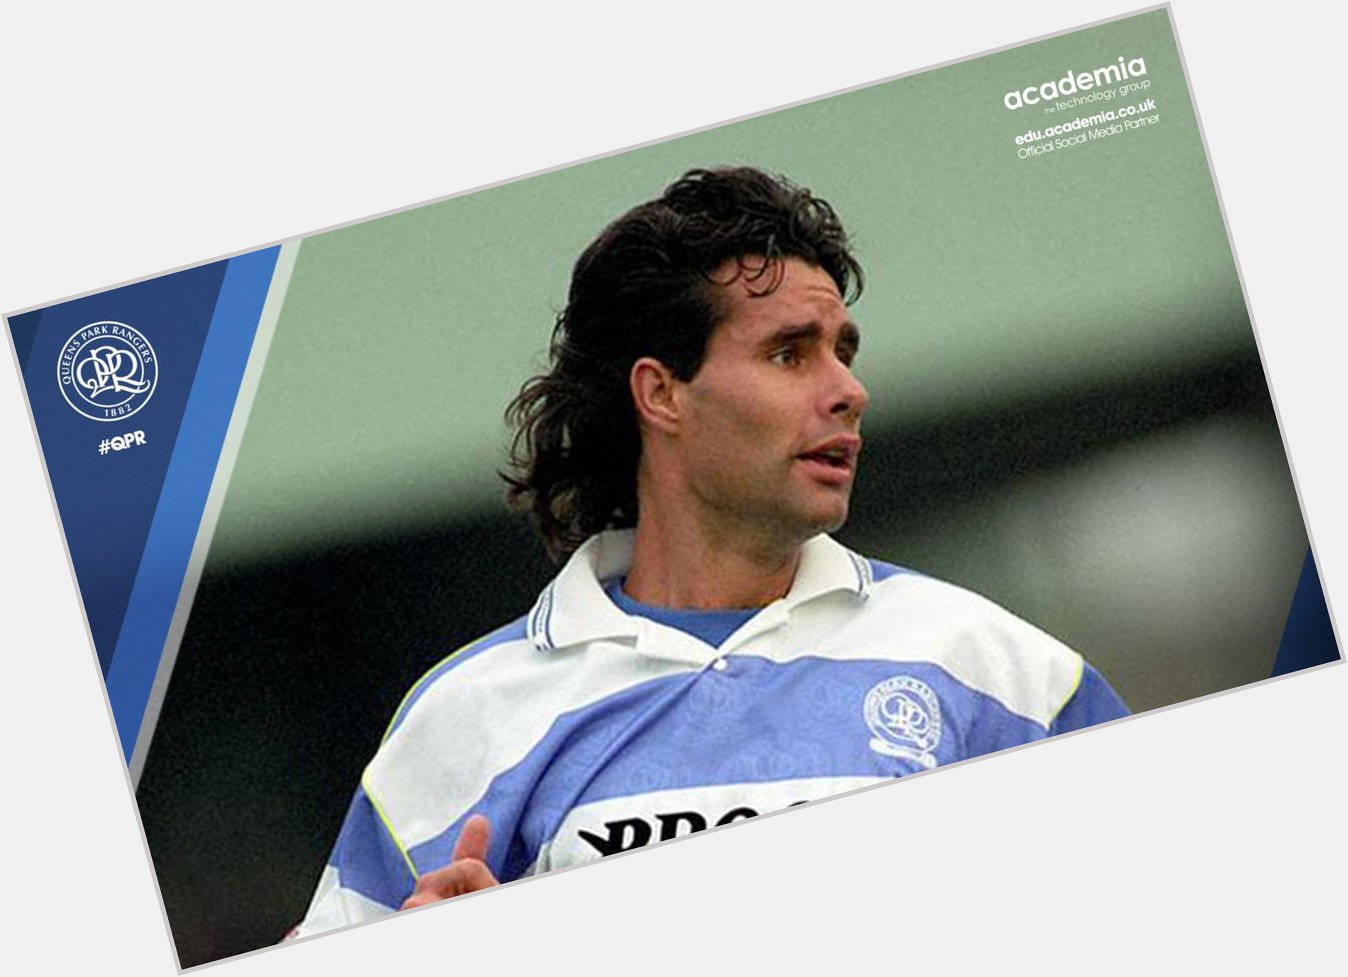  AndySintonQPR isn\t the only former favourite celebrating today.

Happy Birthday too, Roy Wegerle! 